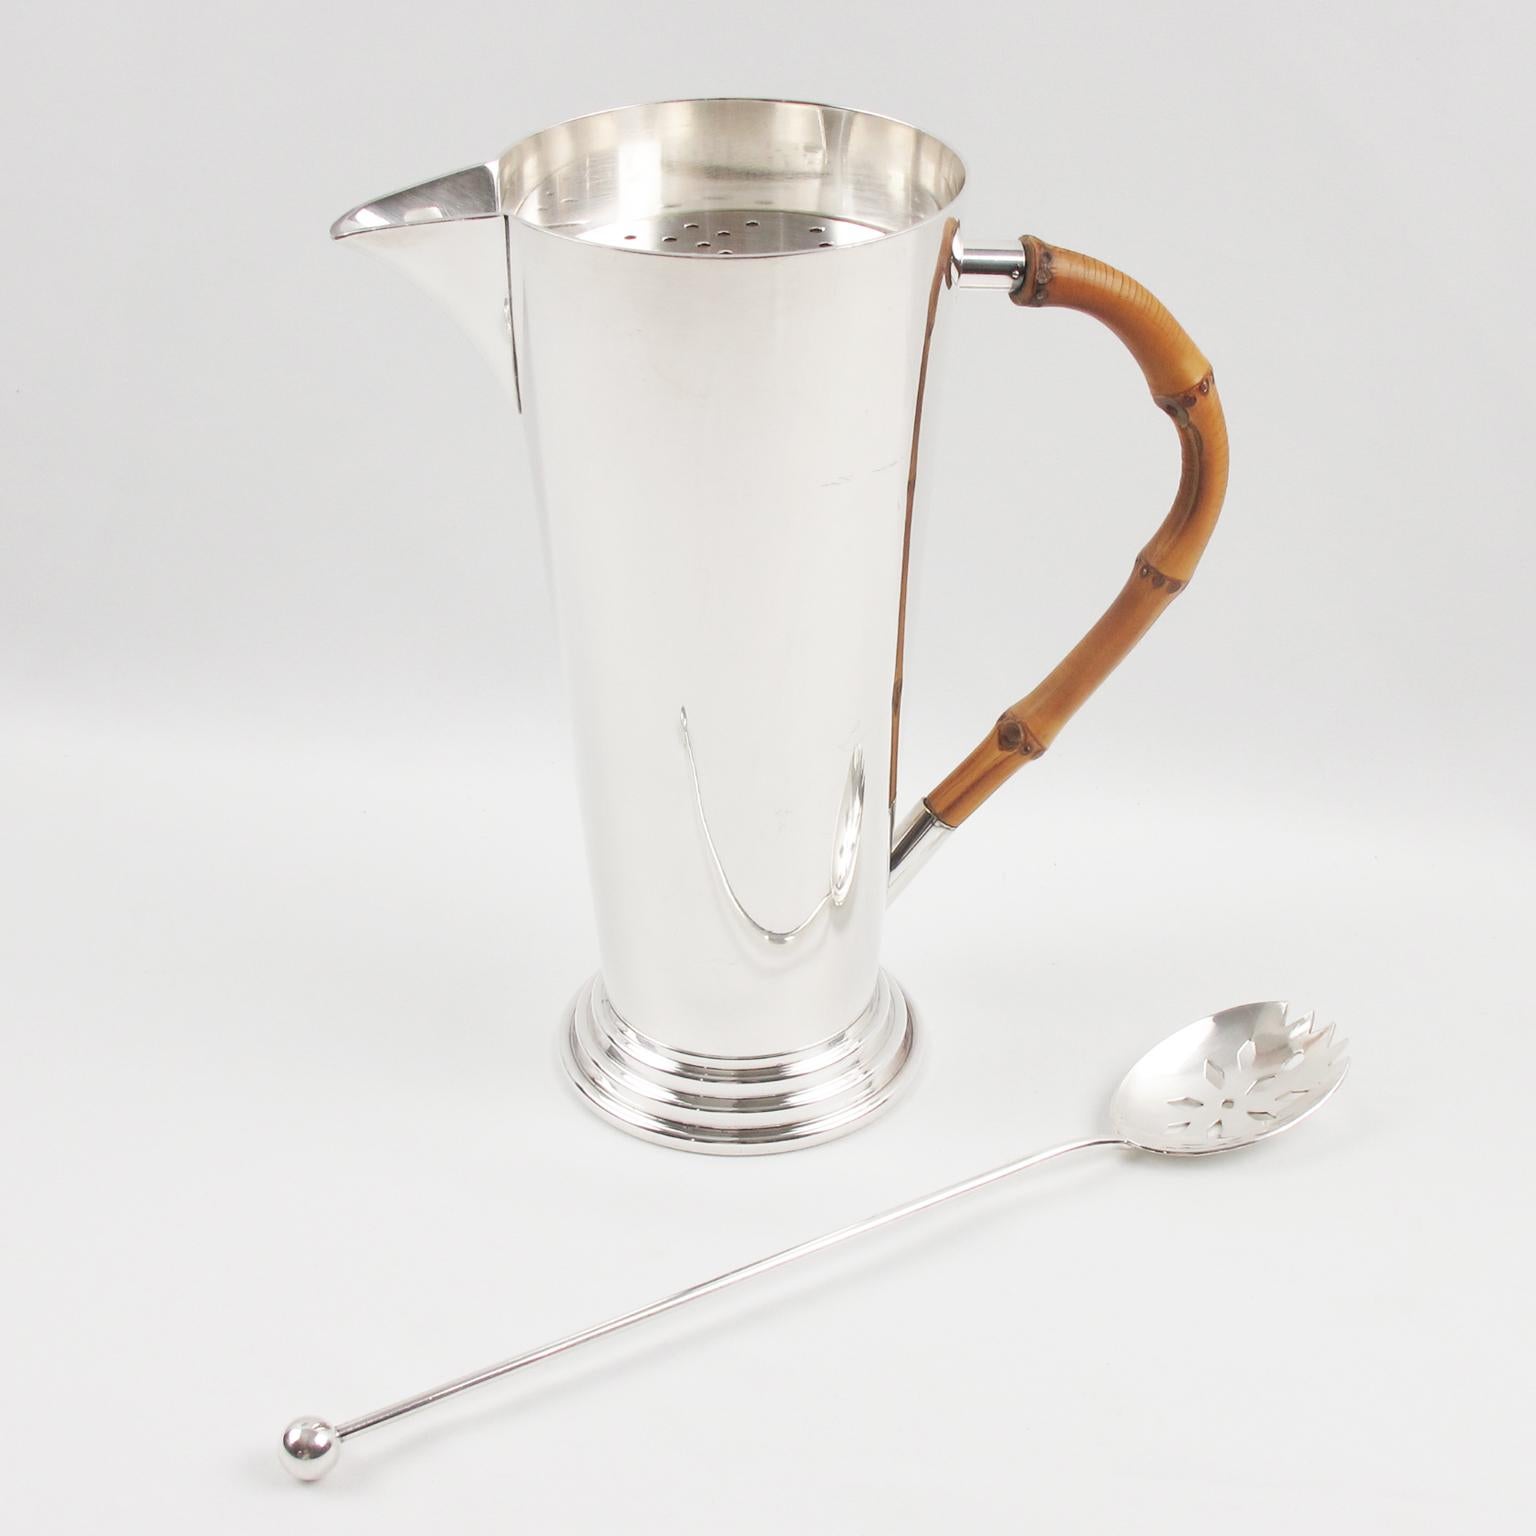 French Silver Plate and Bamboo Barware Cocktail Martini Pitcher and Spoon